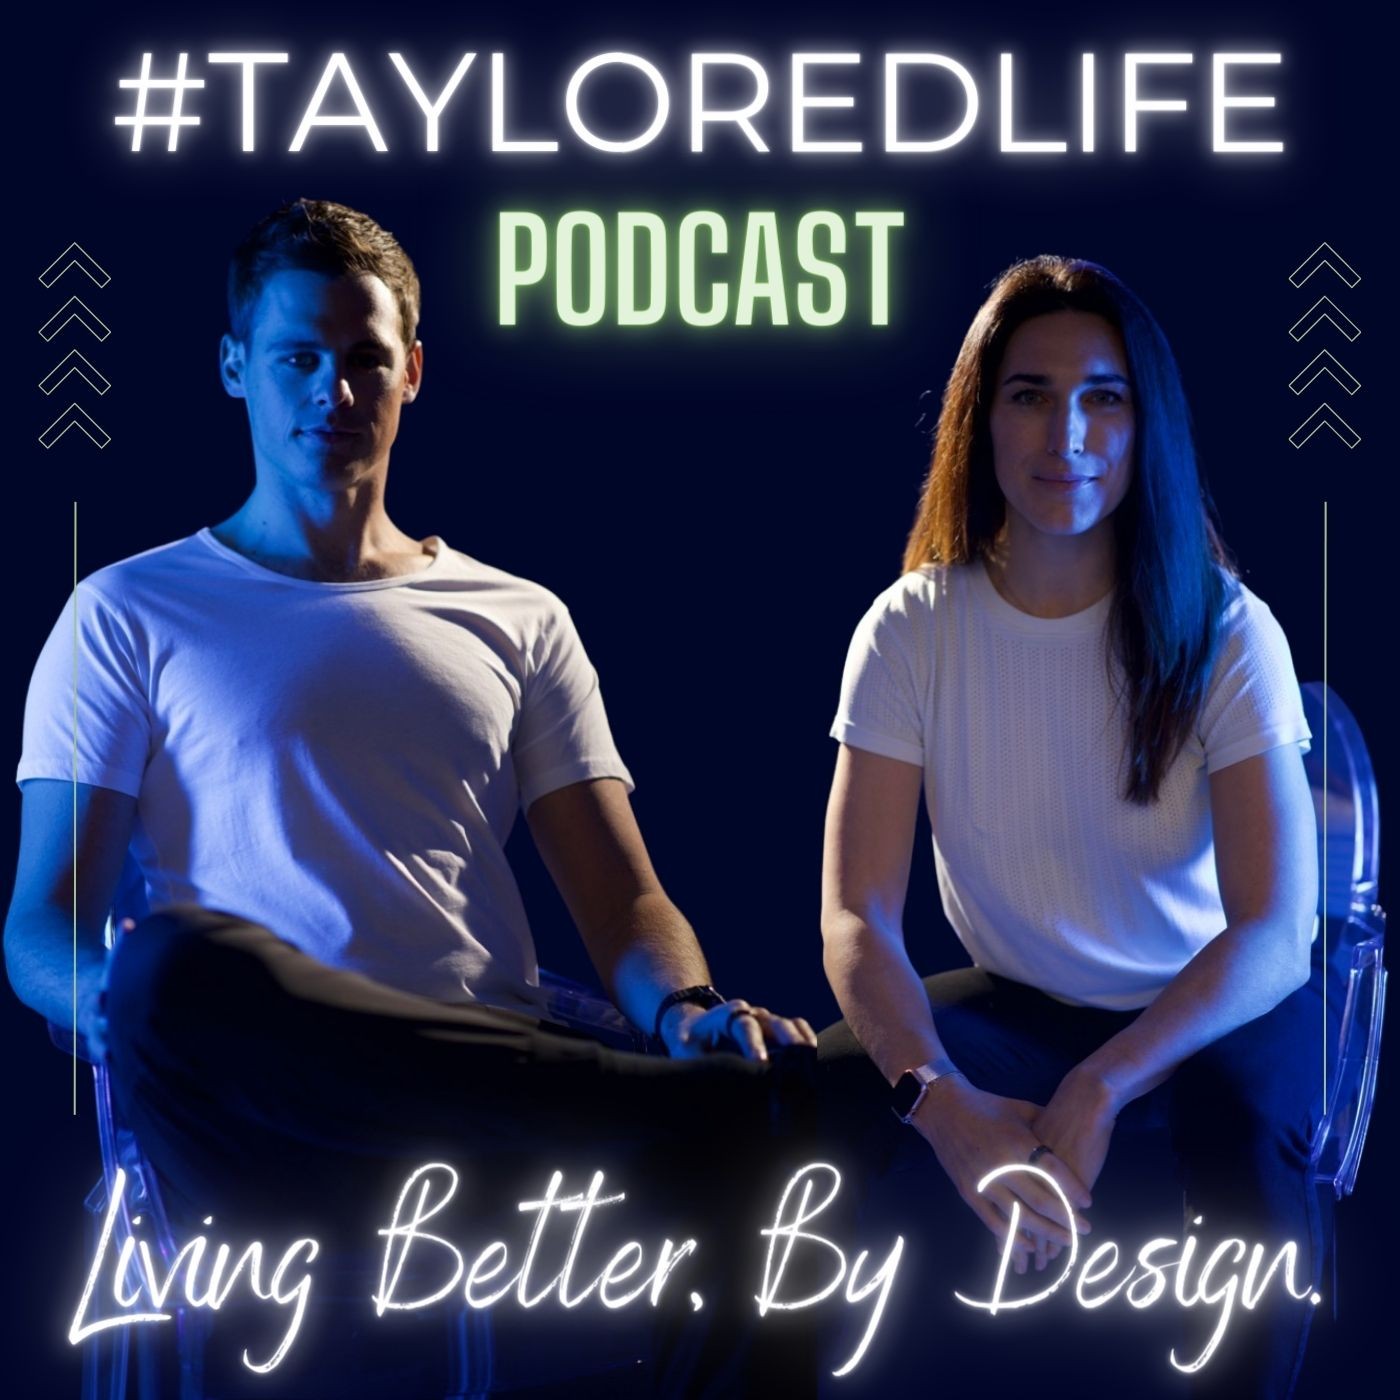 Taylored Life Podcast